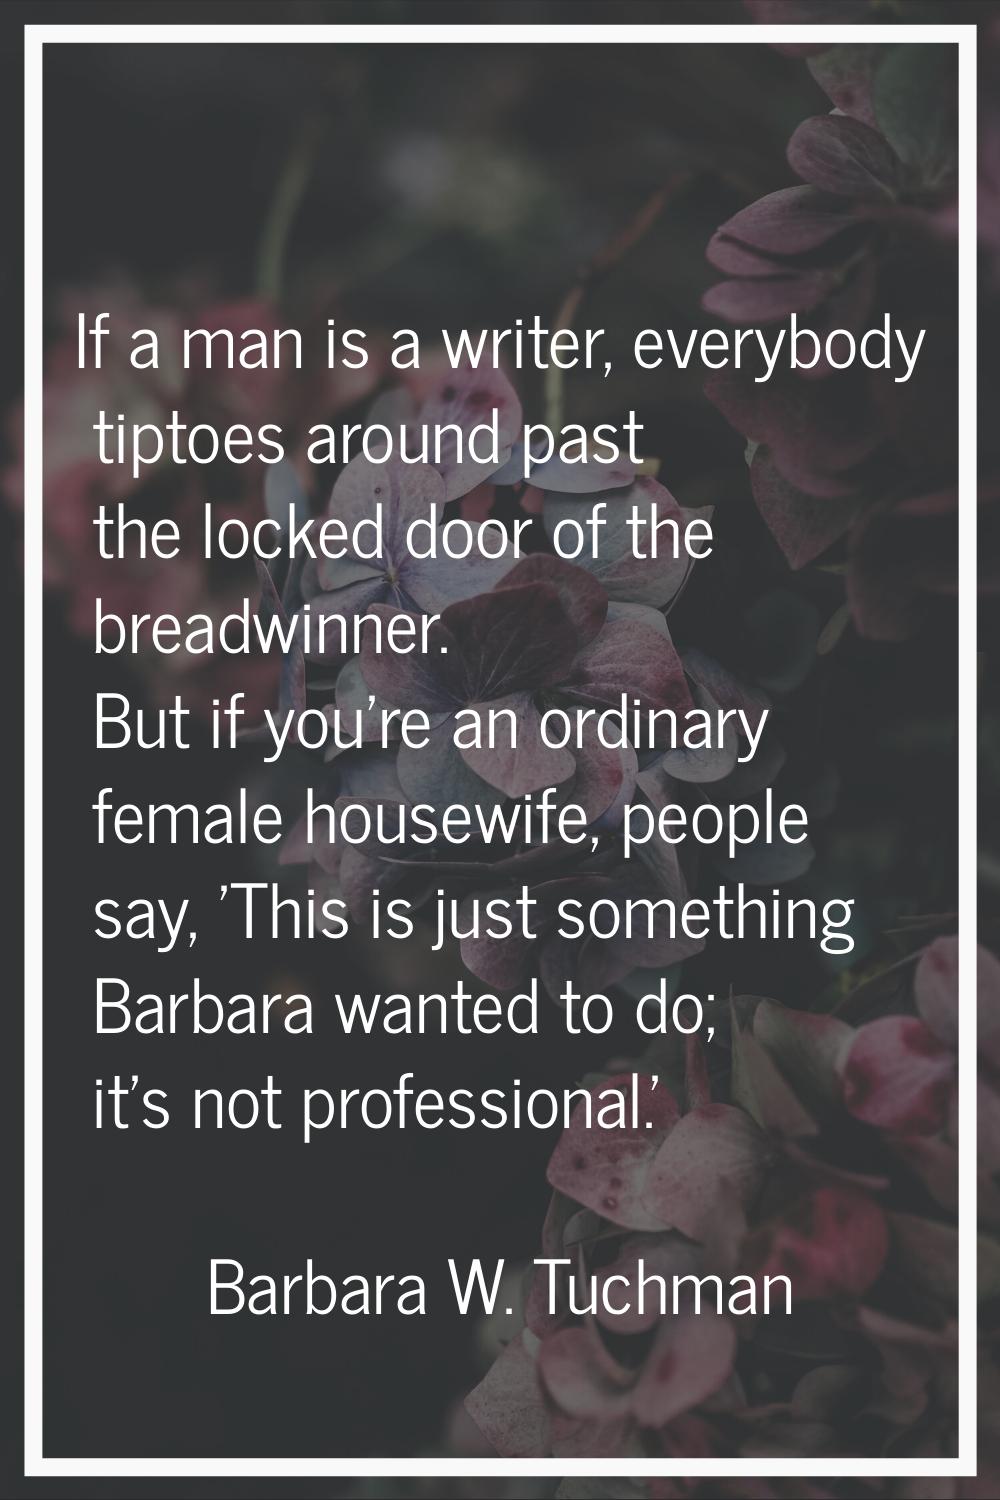 If a man is a writer, everybody tiptoes around past the locked door of the breadwinner. But if you'